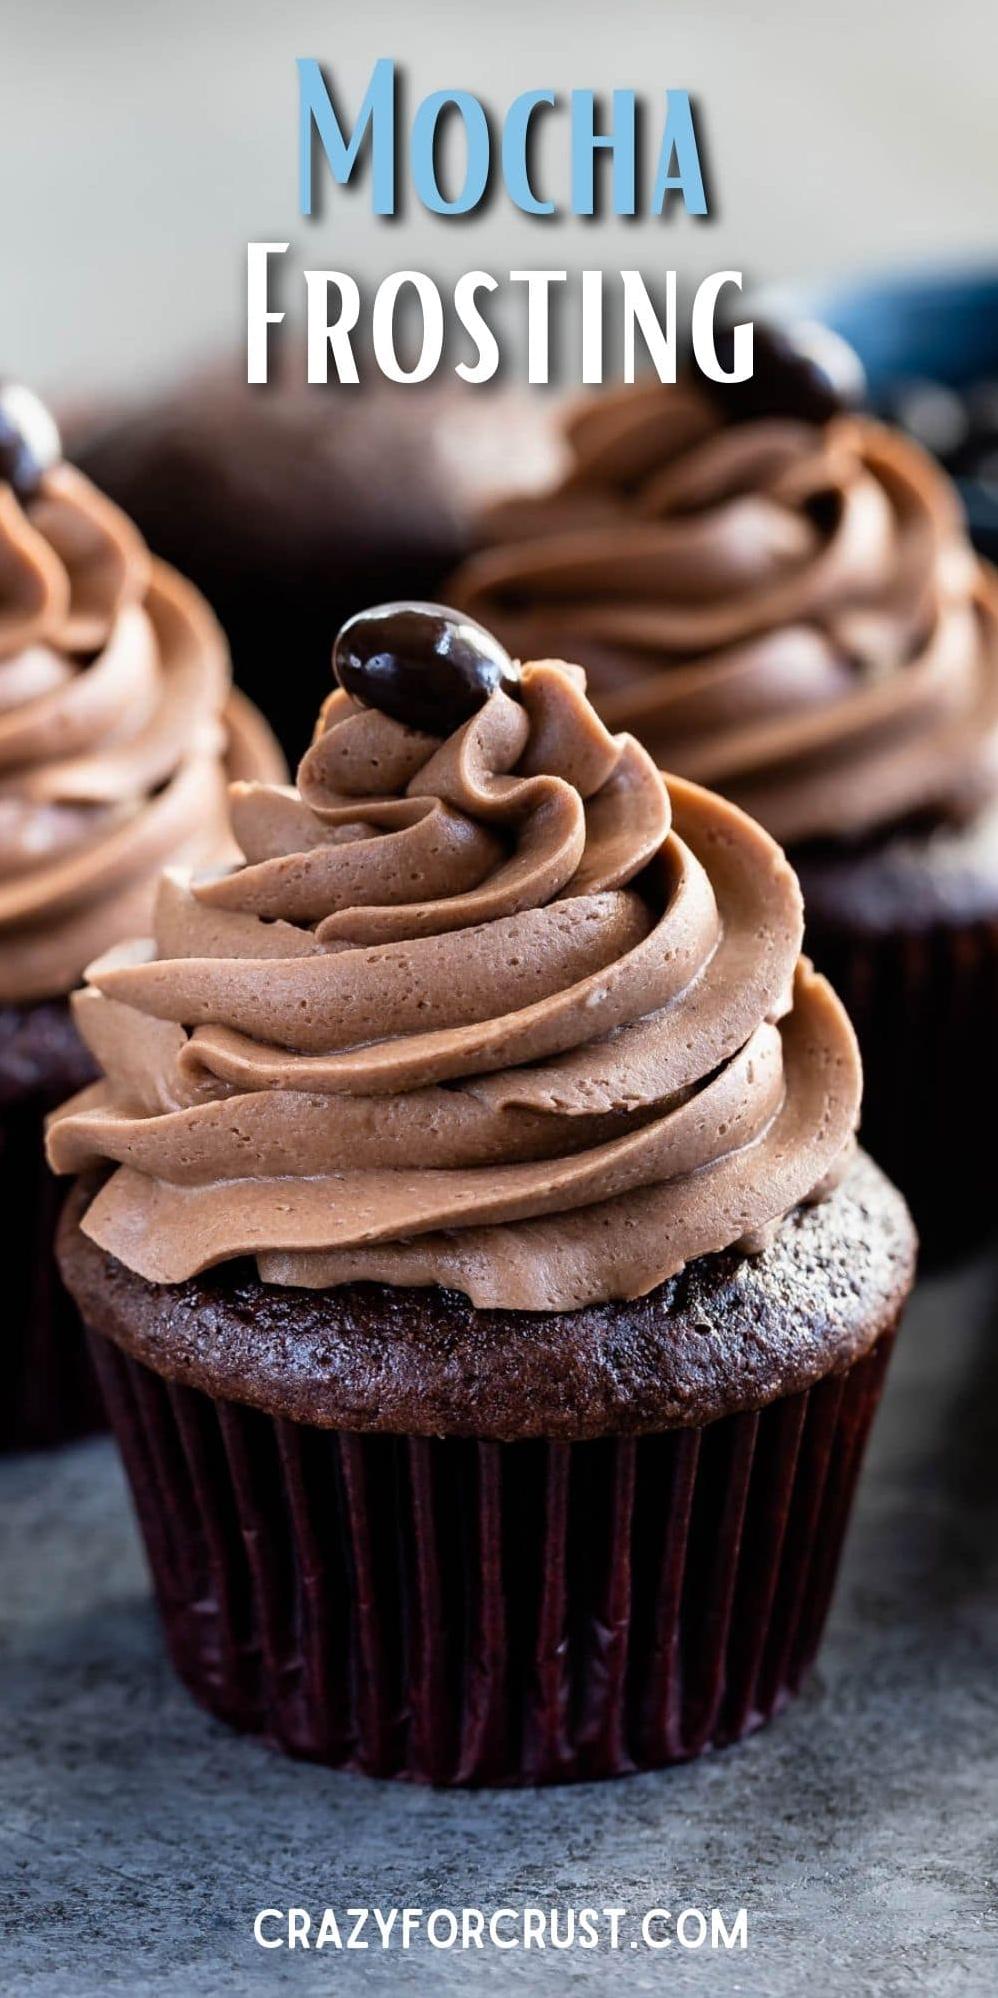  Take a moment and imagine the perfect chocolatey topping for your cupcakes.